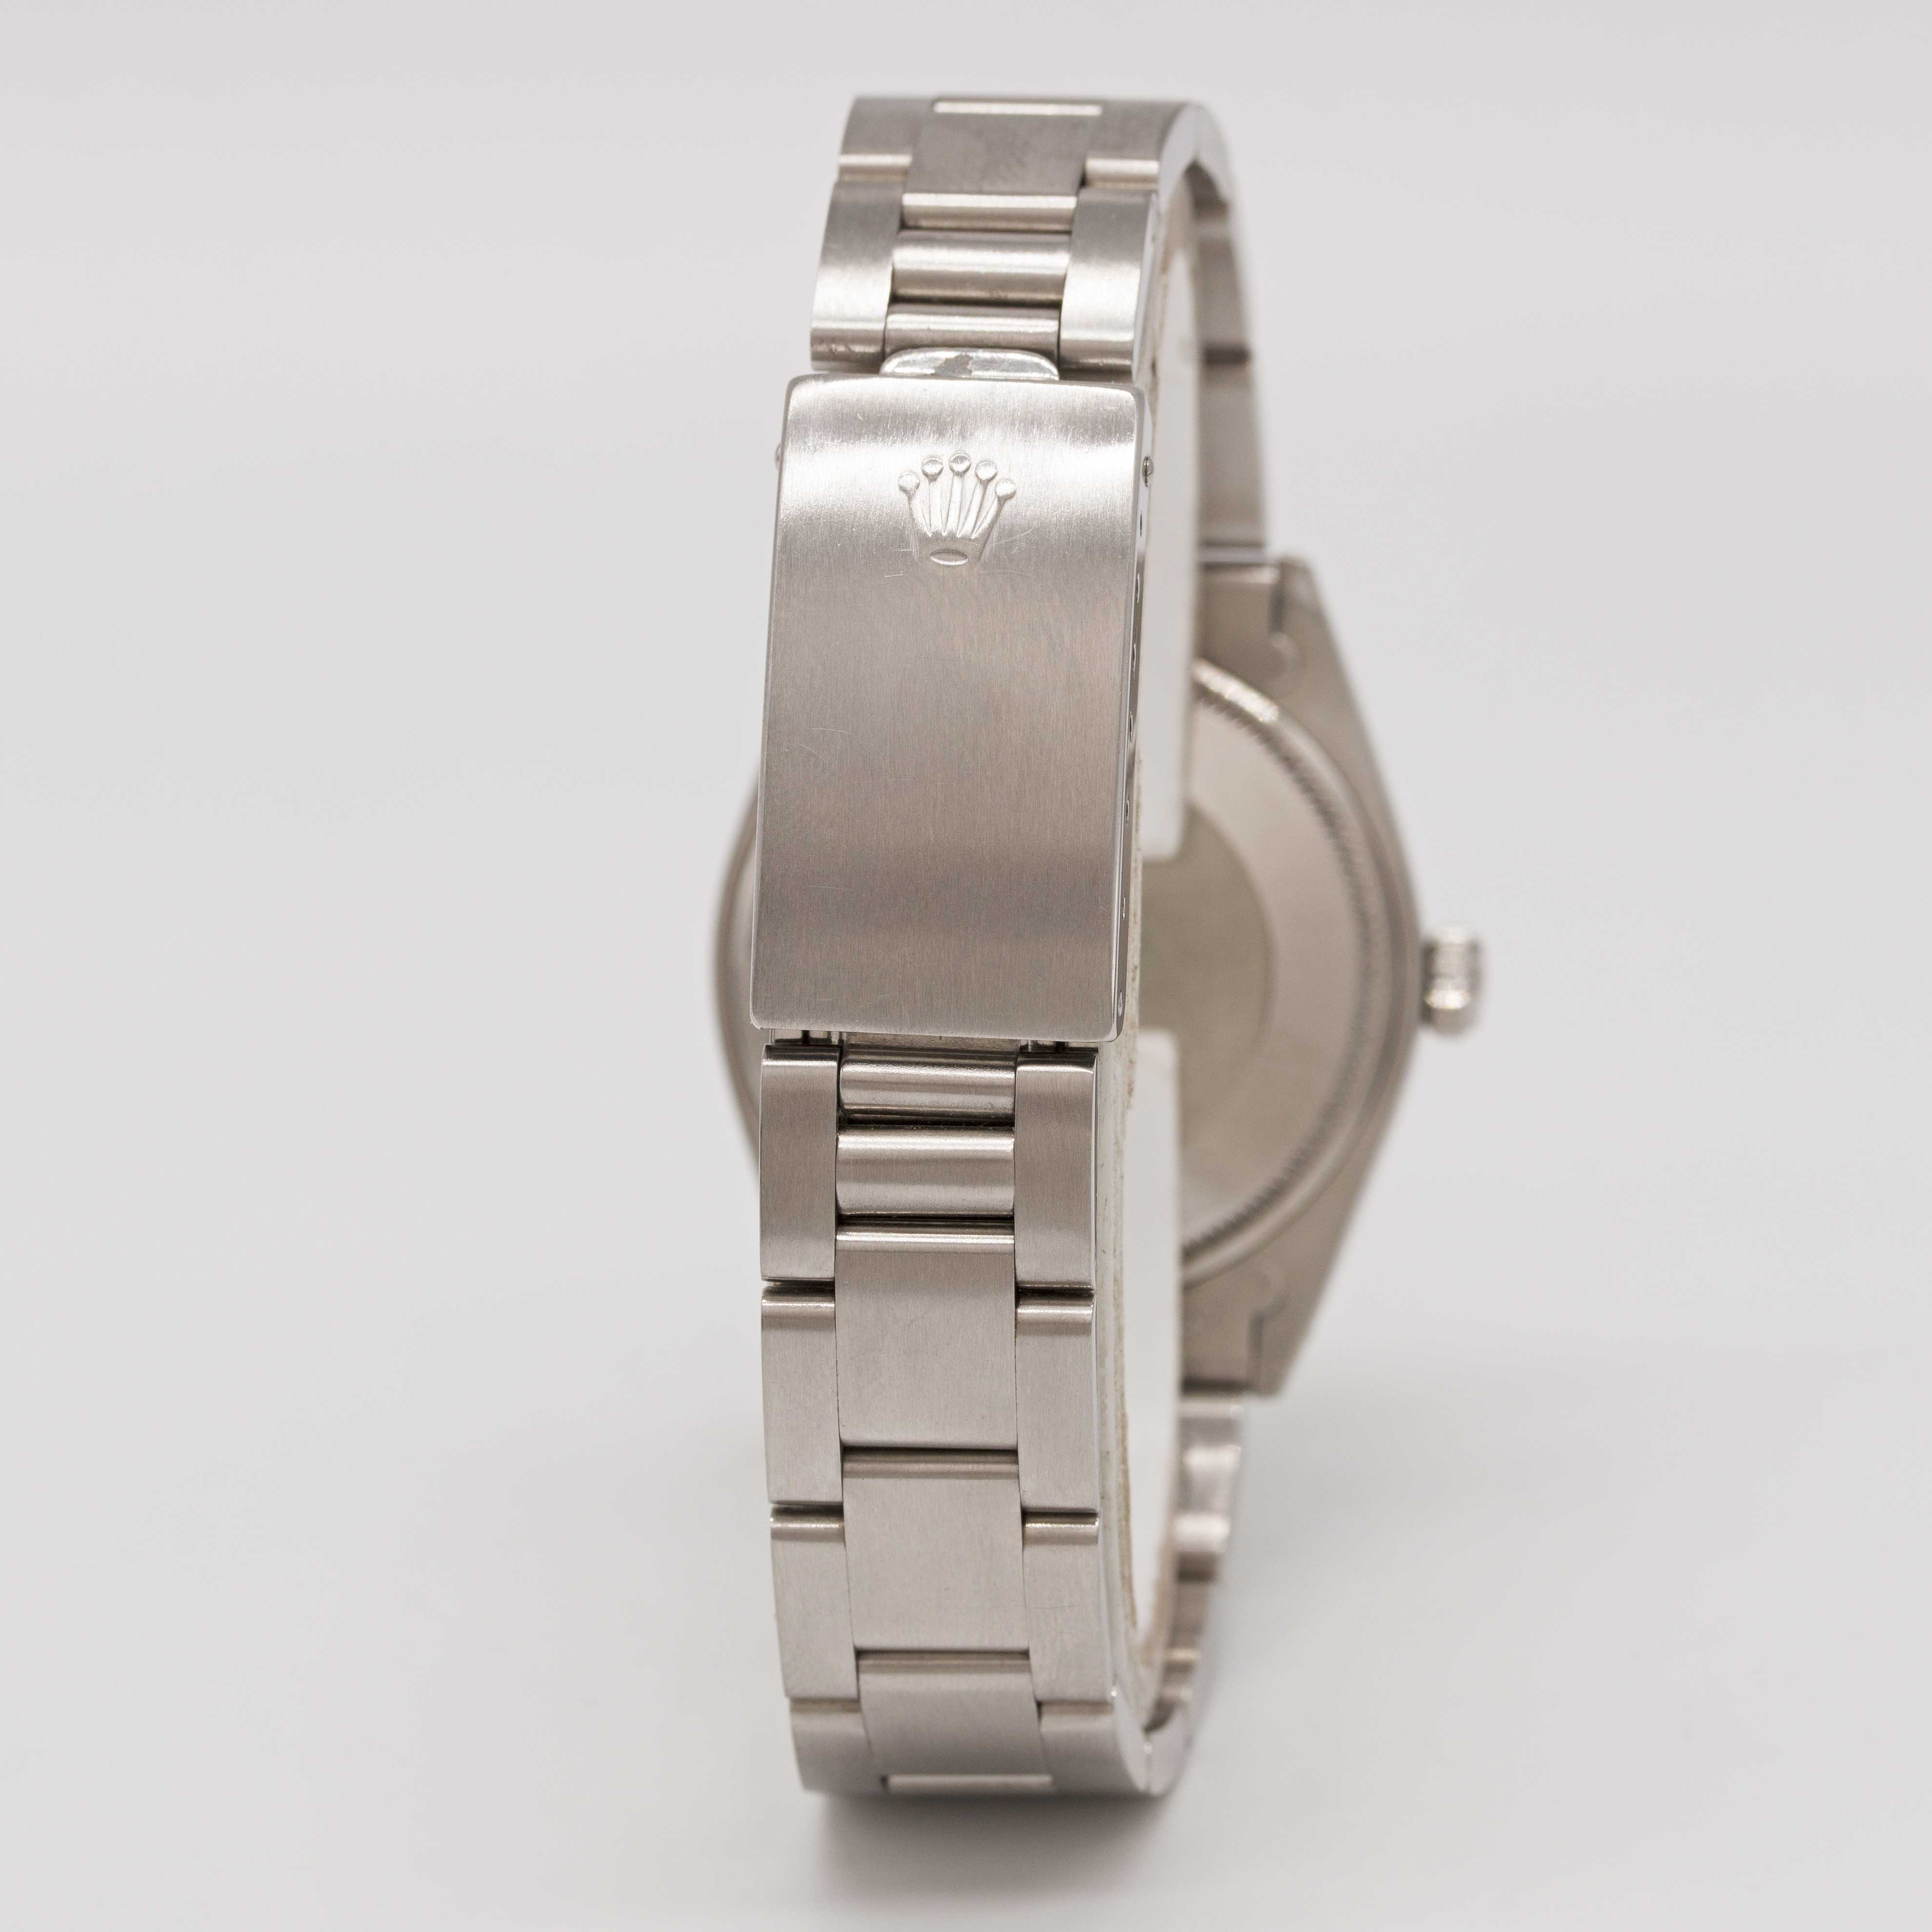 A RARE GENTLEMAN'S STAINLESS STEEL ROLEX OYSTER PERPETUAL AIR KING BRACELET WATCH CIRCA 1989, REF. - Image 7 of 11